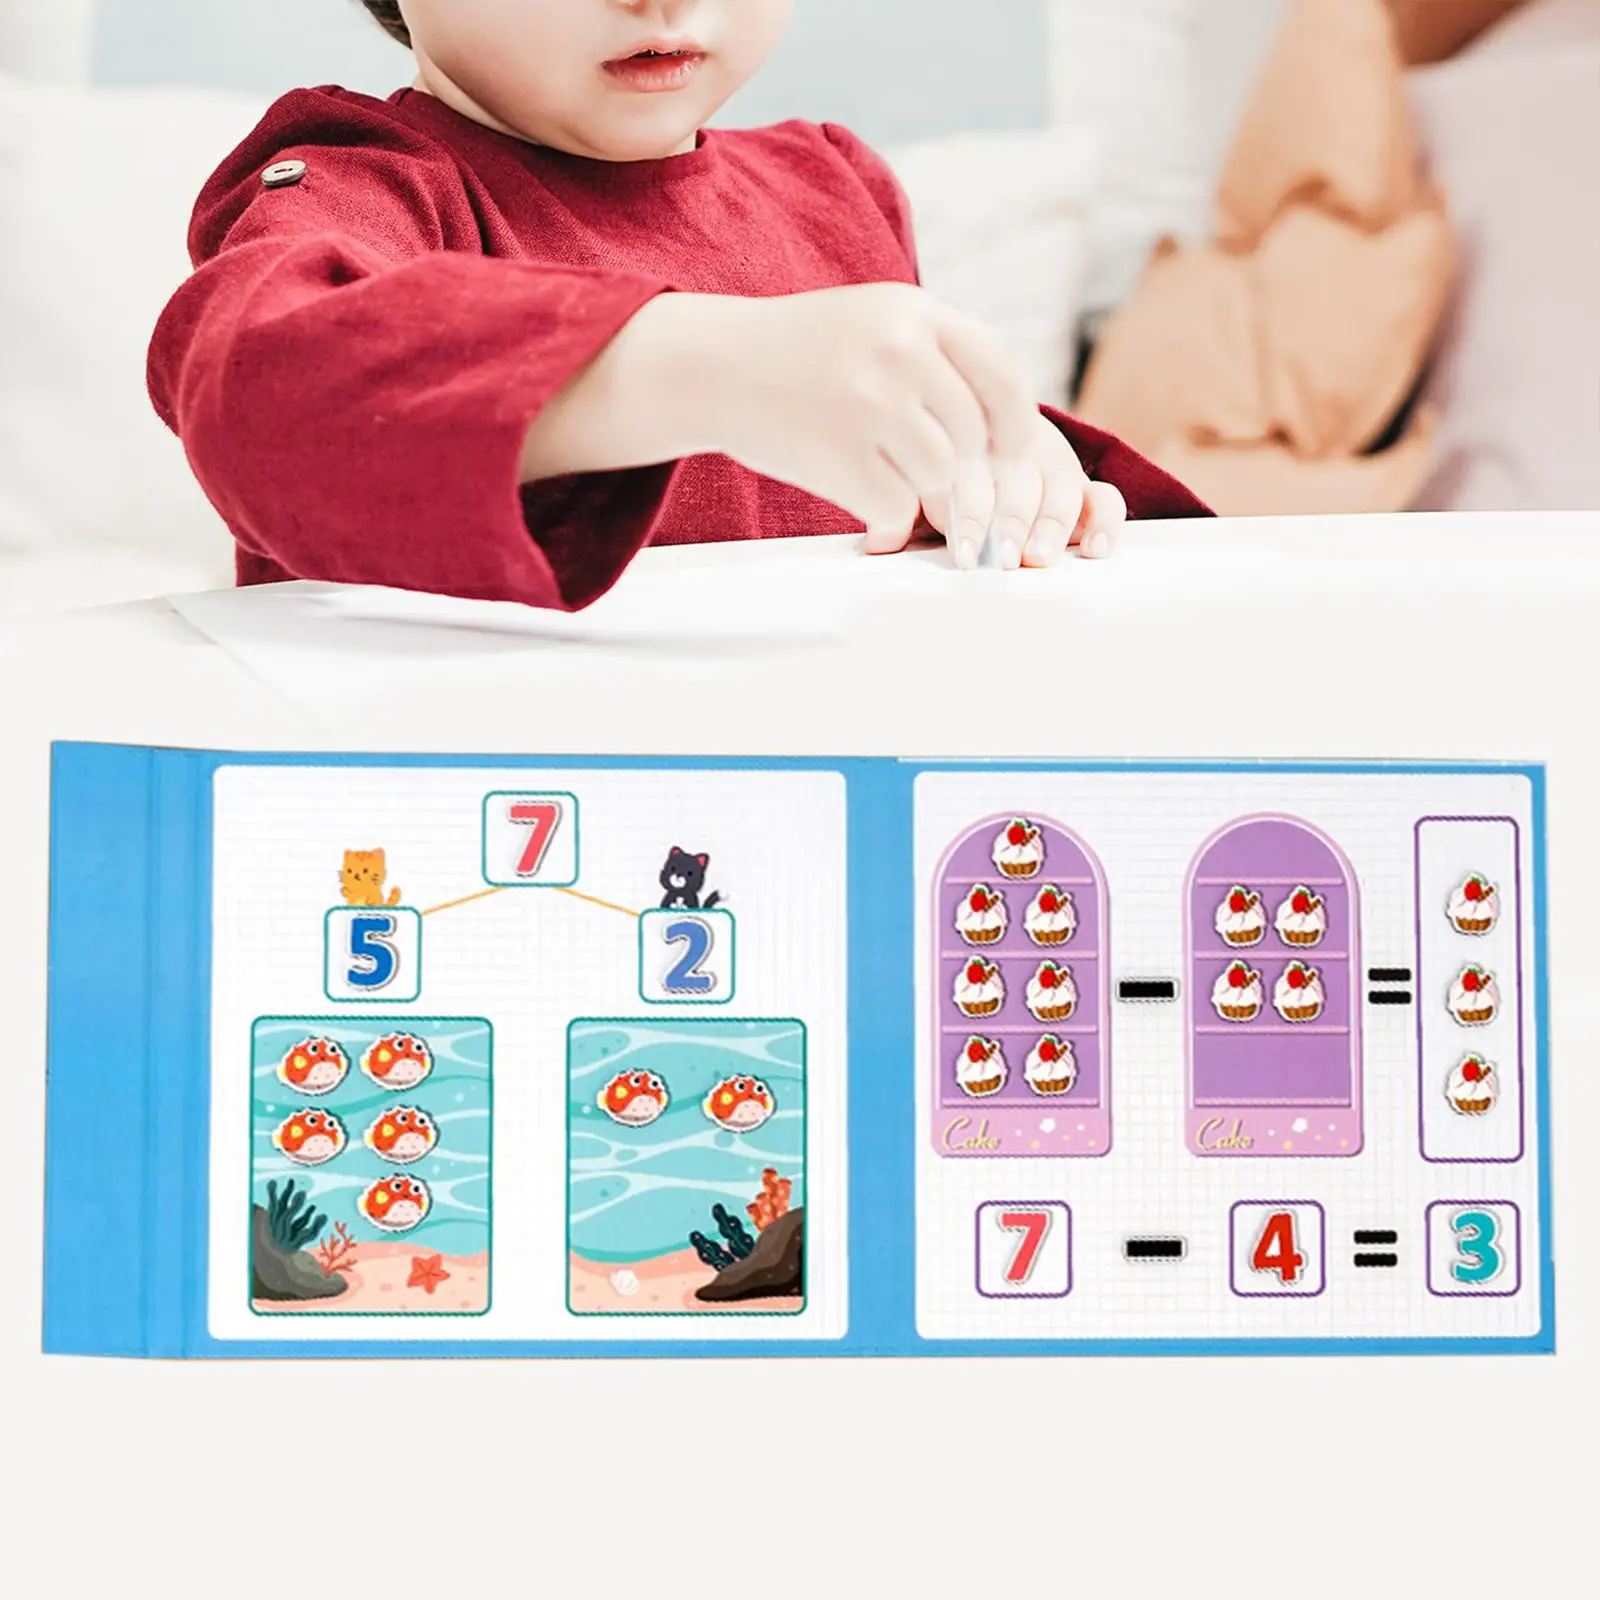 Kids Math Arithmetic Toy Preschool Manipulatives Math Games Numbers Counting Toy for Elementary Activities Preschool boys kids